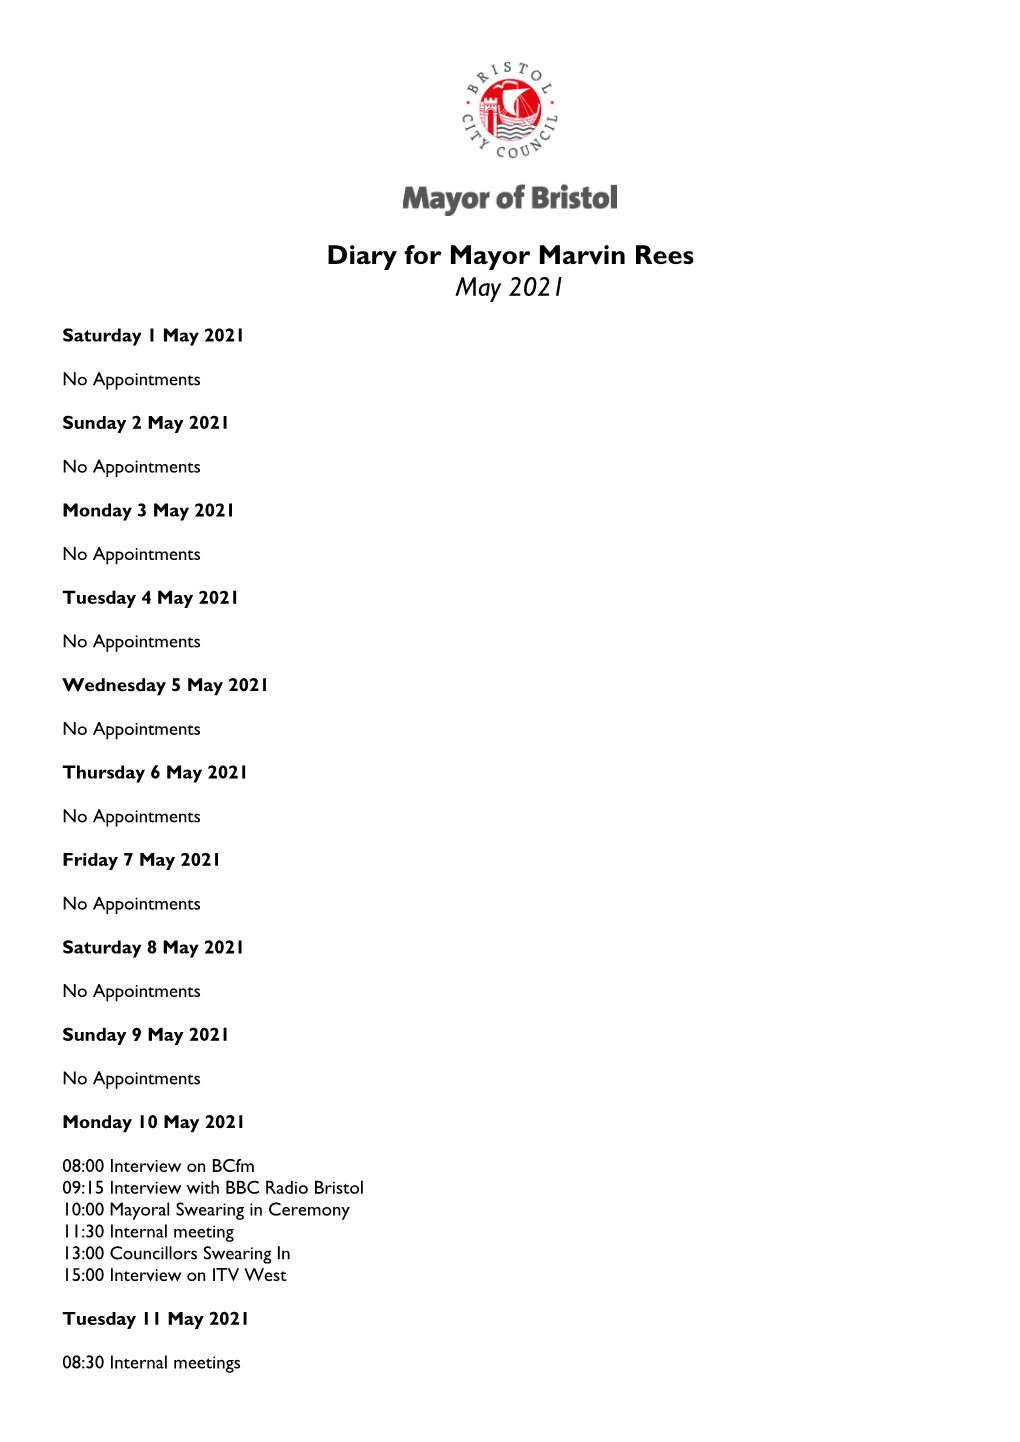 Diary for Mayor Marvin Rees May 2021